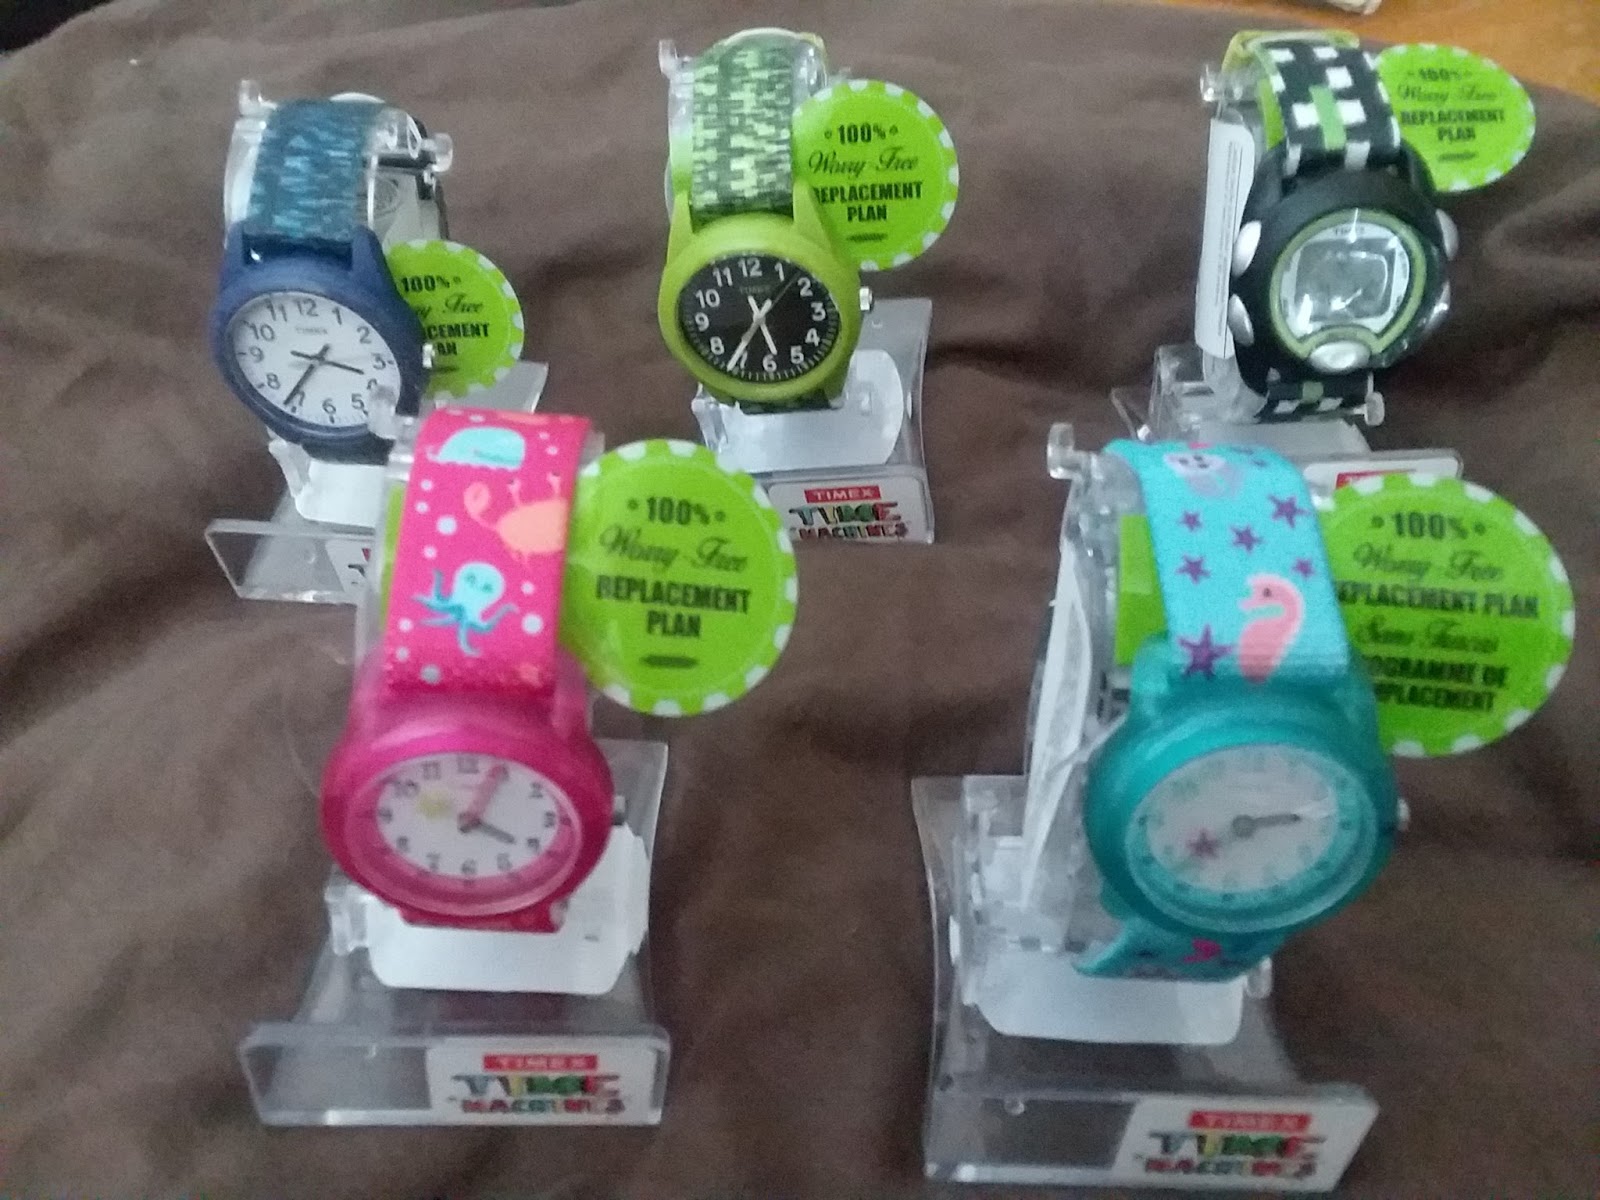 ThemeParkMama: Timex Time Machines teaching kids how to tell time!